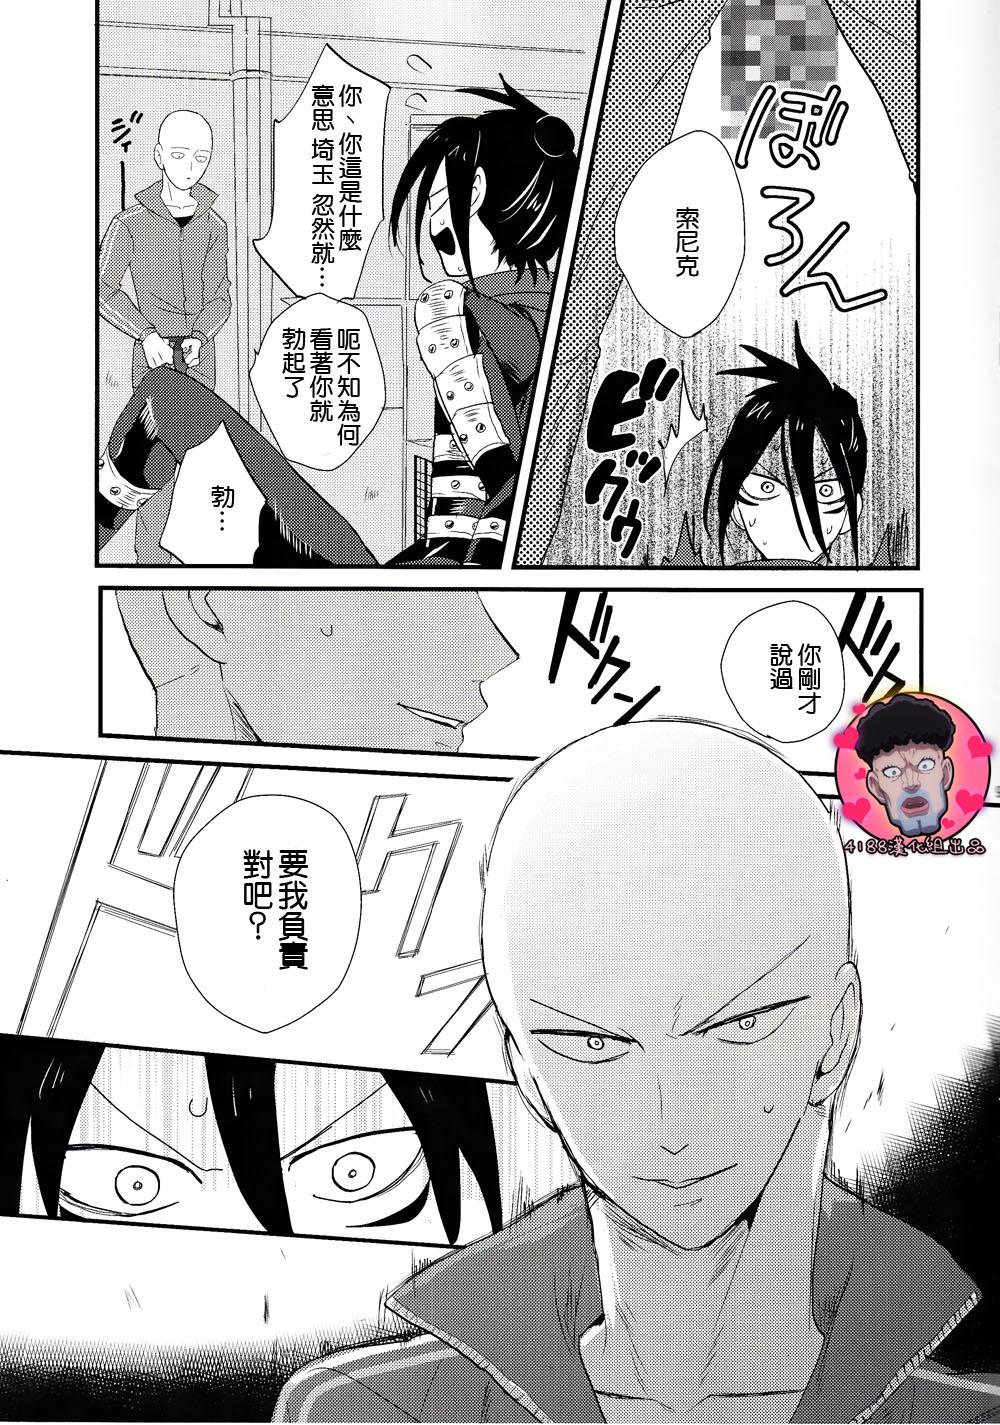 Taboo Tsuyokute New Game - One punch man Kiss - Page 8